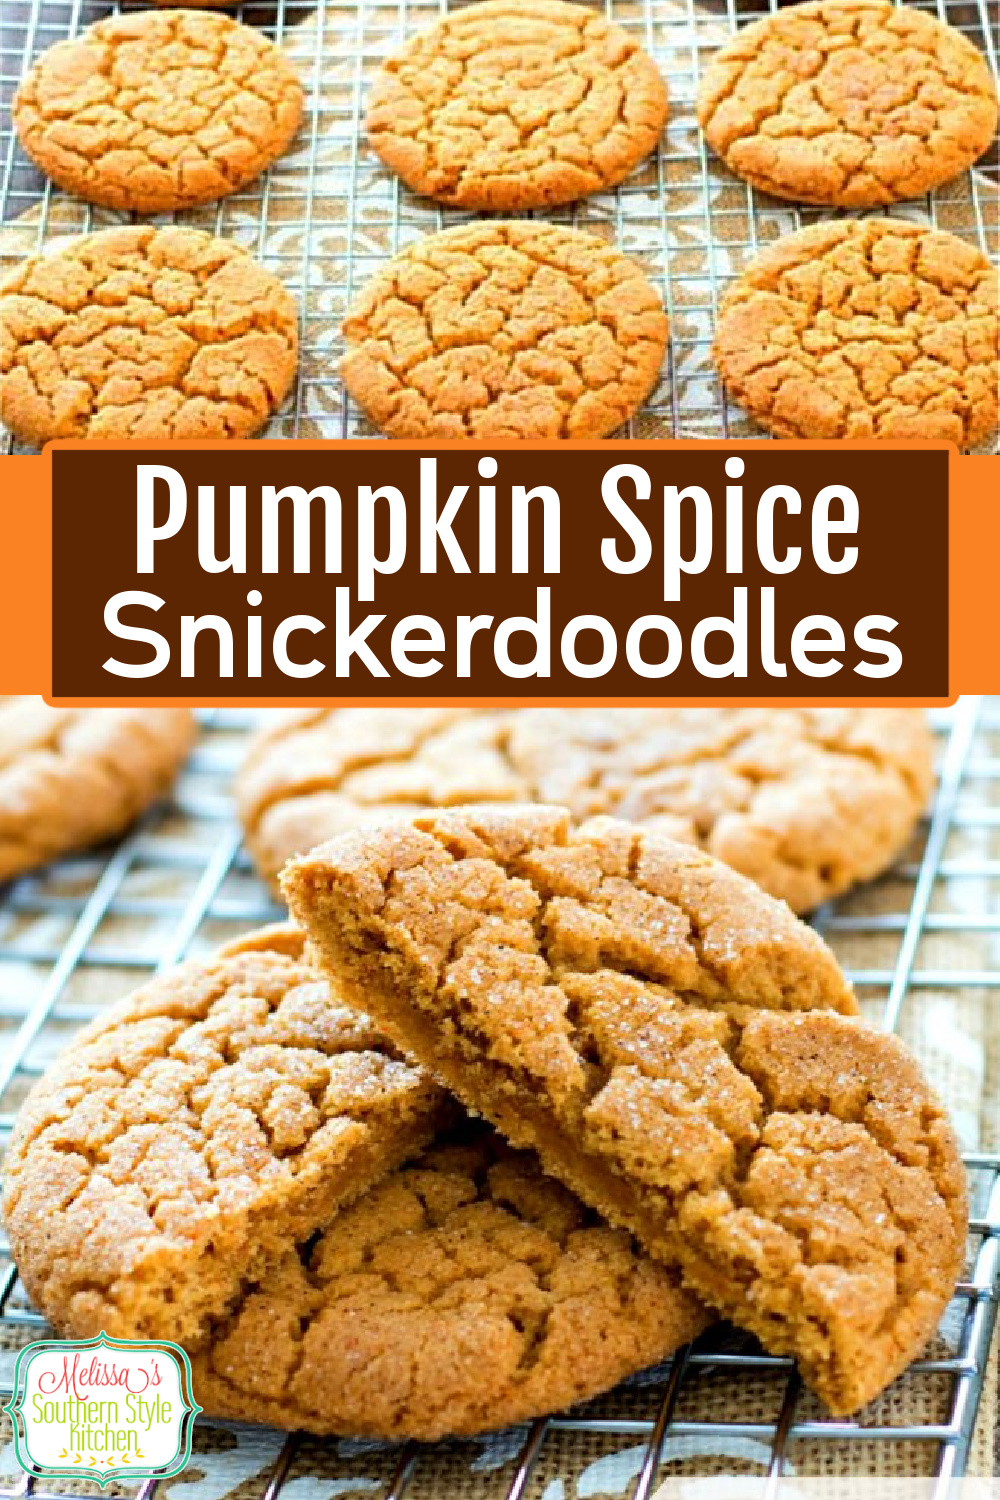 These sweet and spicy seasonal cookies won't last long in your fall cookie jar #snickerdoodles #pumpkinspice #cookies #cookierecipes #holidayrecipes #holidaybaking #pumpkincookies #pumpkinrecipes #fallbaking #desserts #cookieswap #christmascookies #southernfood via @melissasssk